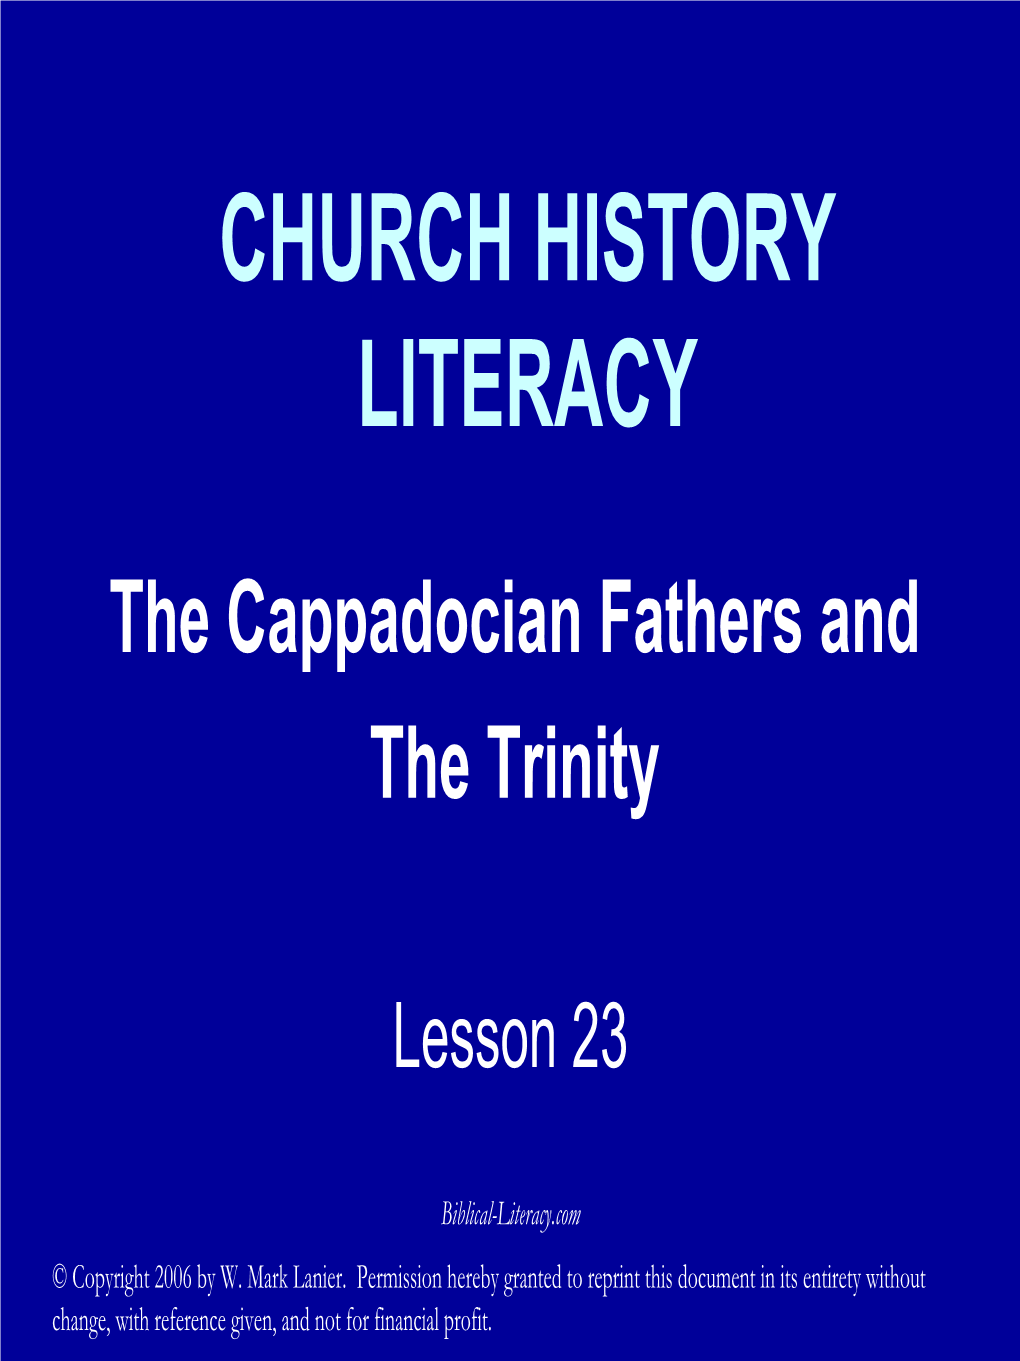 The Cappadocian Fathers and the Trinity